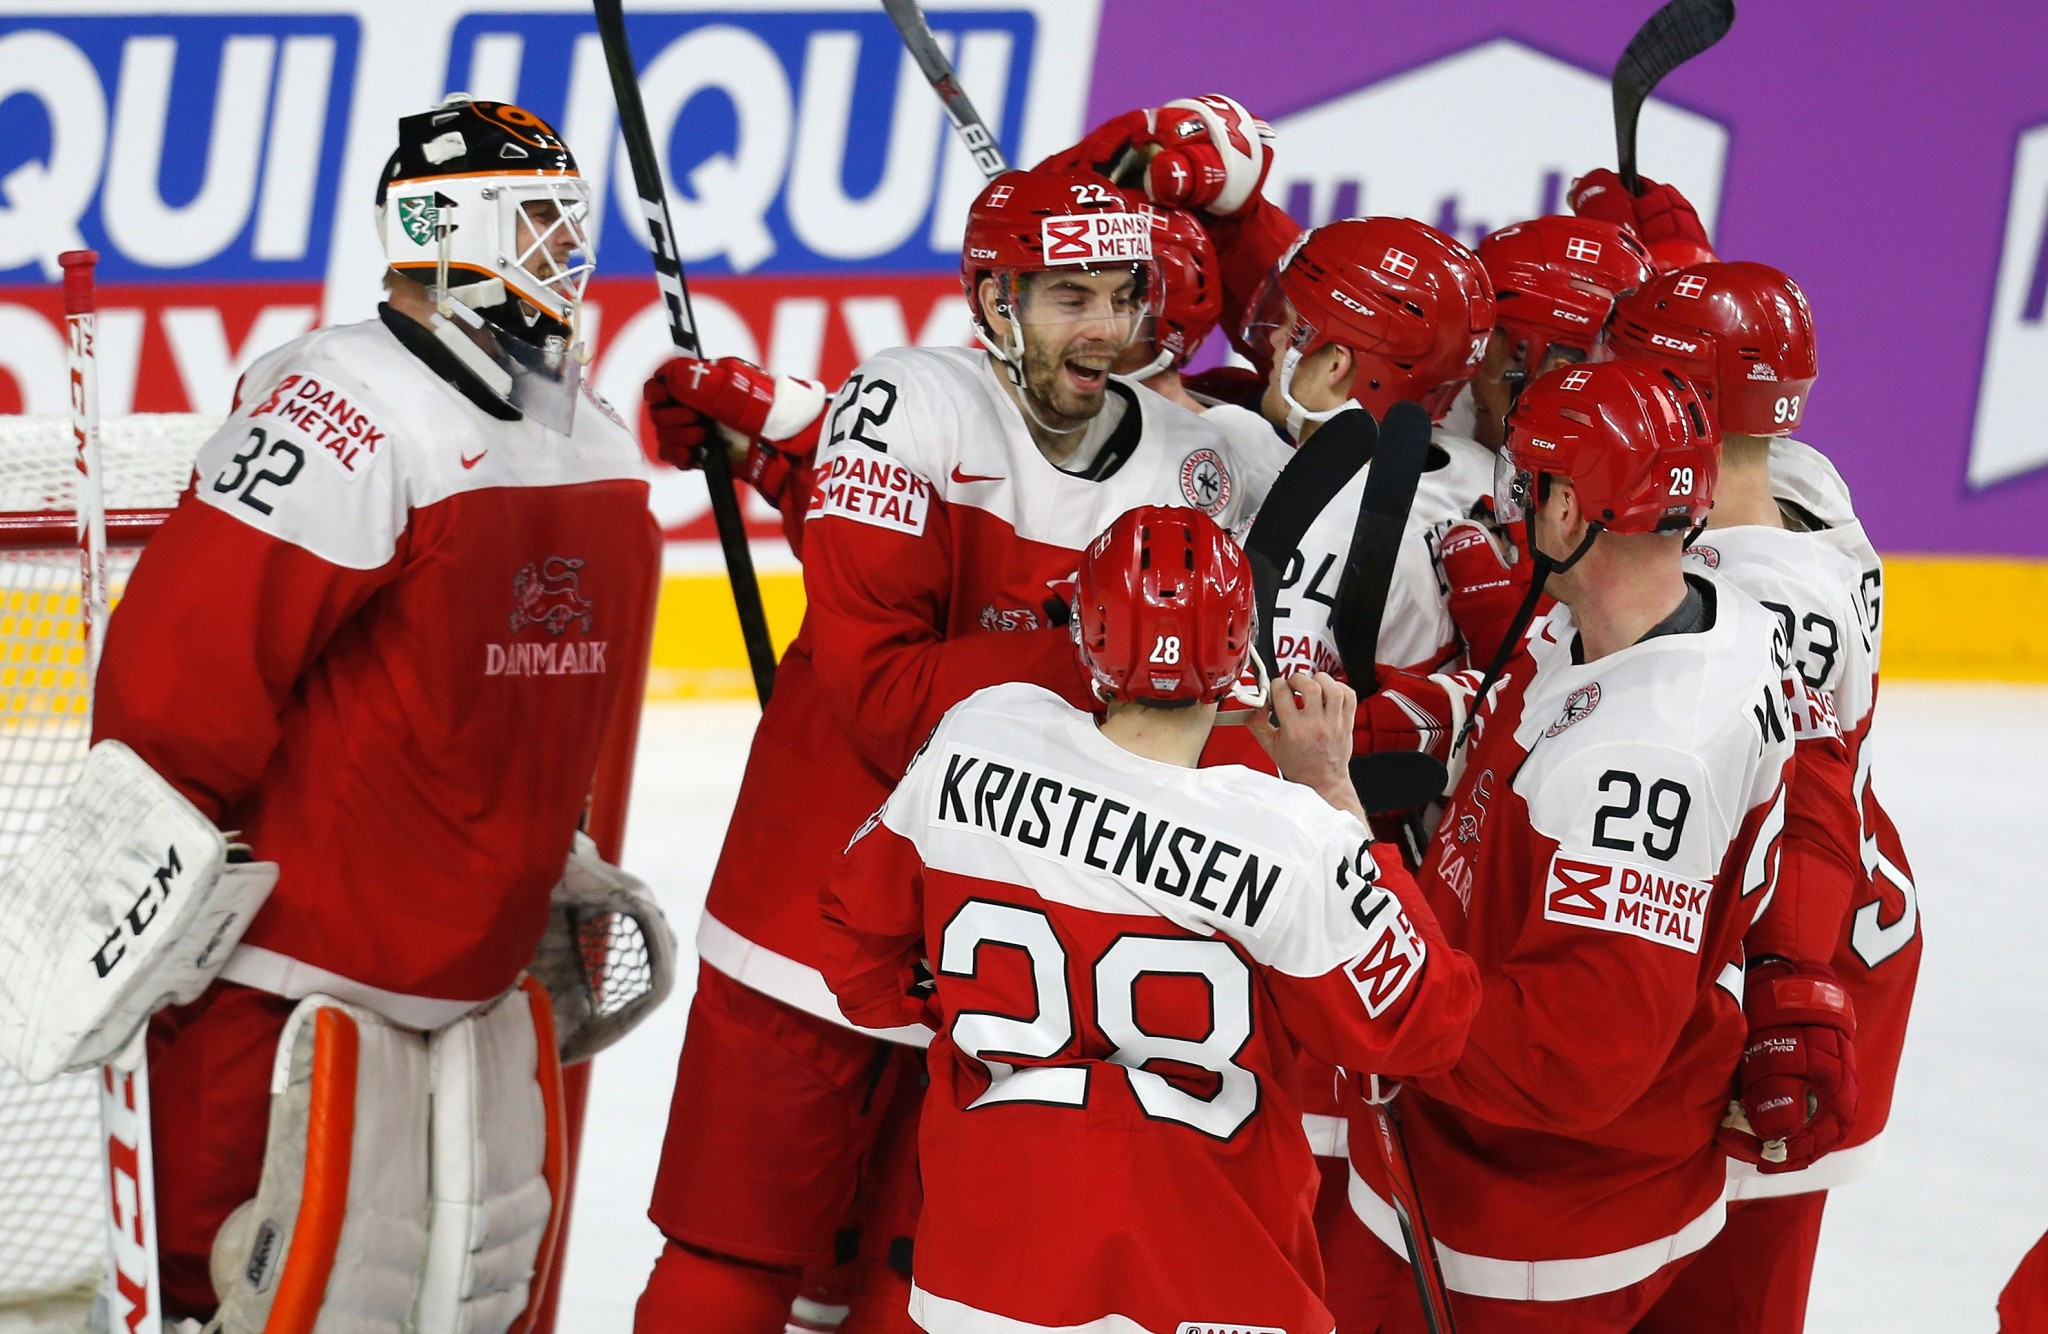 Hosts Denmark to open against Germany at 2018 IIHF World Championship 